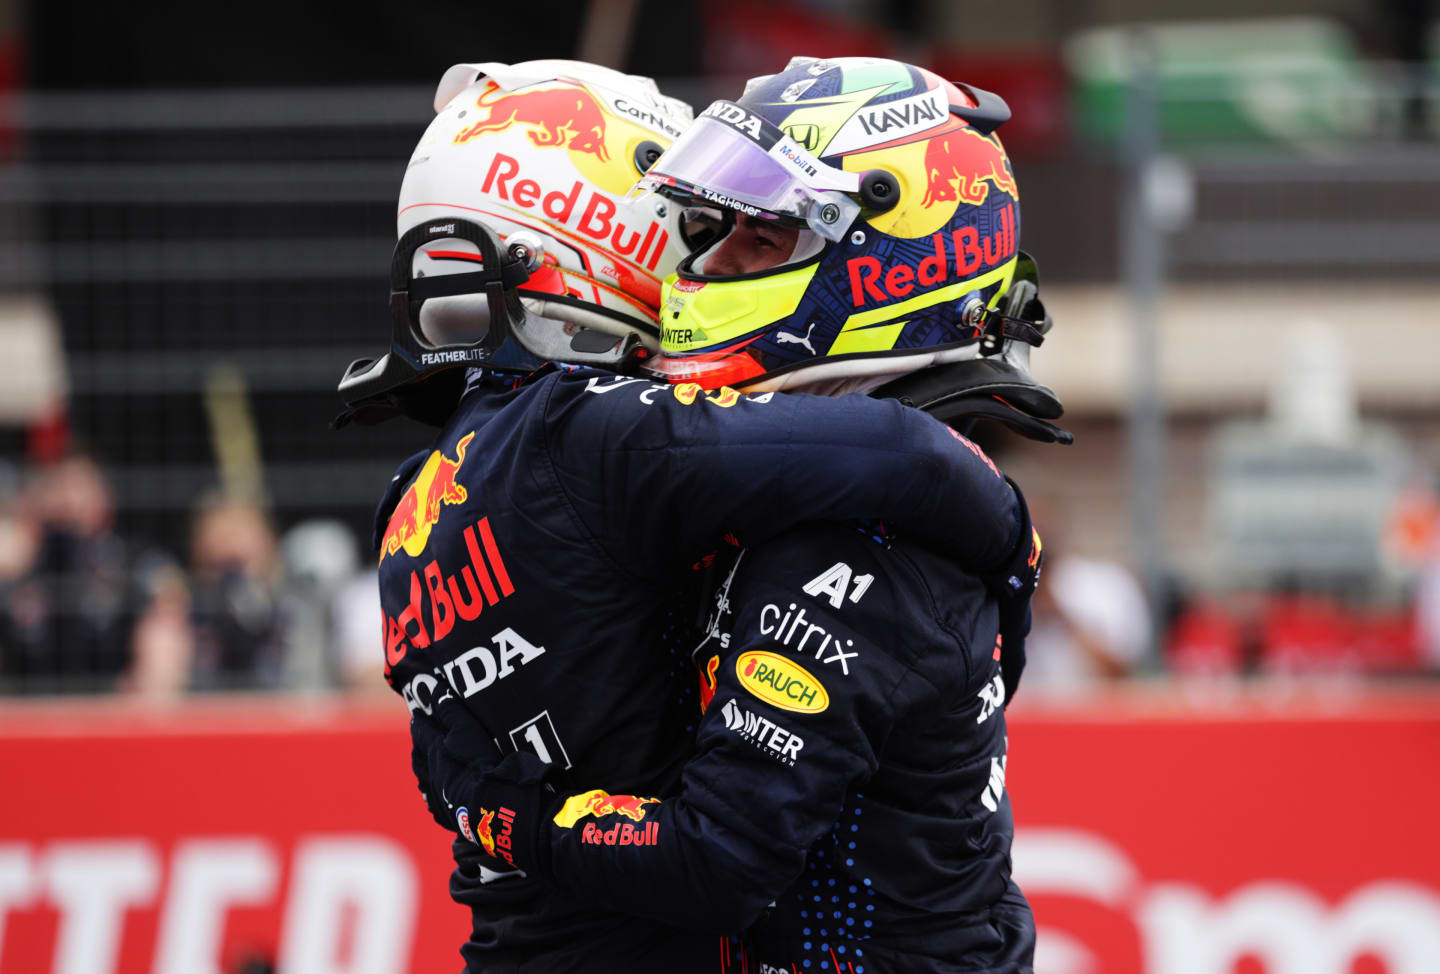 LE CASTELLET, FRANCE - JUNE 20: Race winner Max Verstappen of Netherlands and Red Bull Racing and